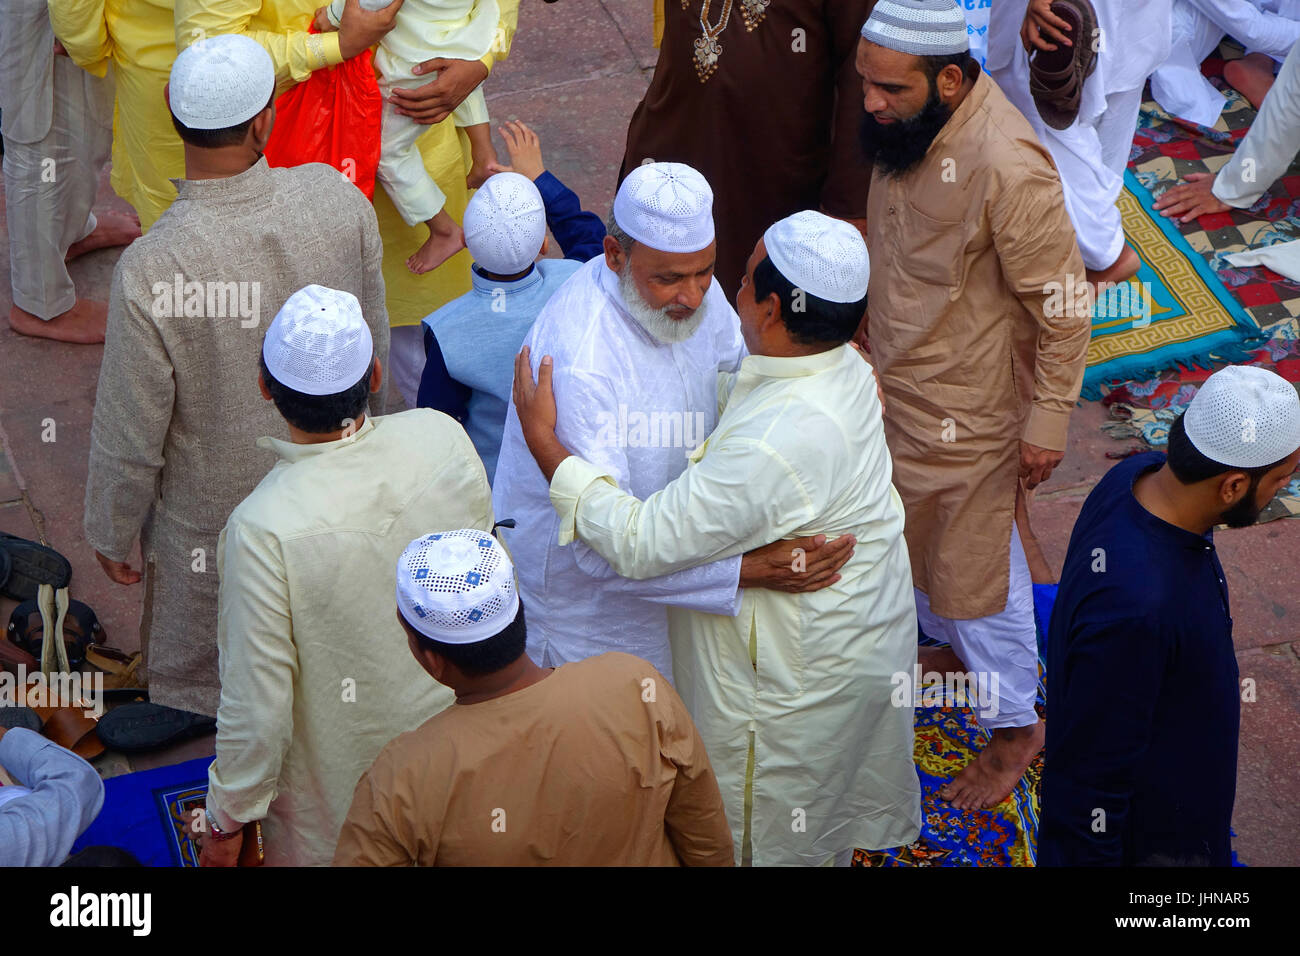 people at jama masjid Delhi India celebration eid al fitr by wishing and hugging and spreading love. Stock Photo